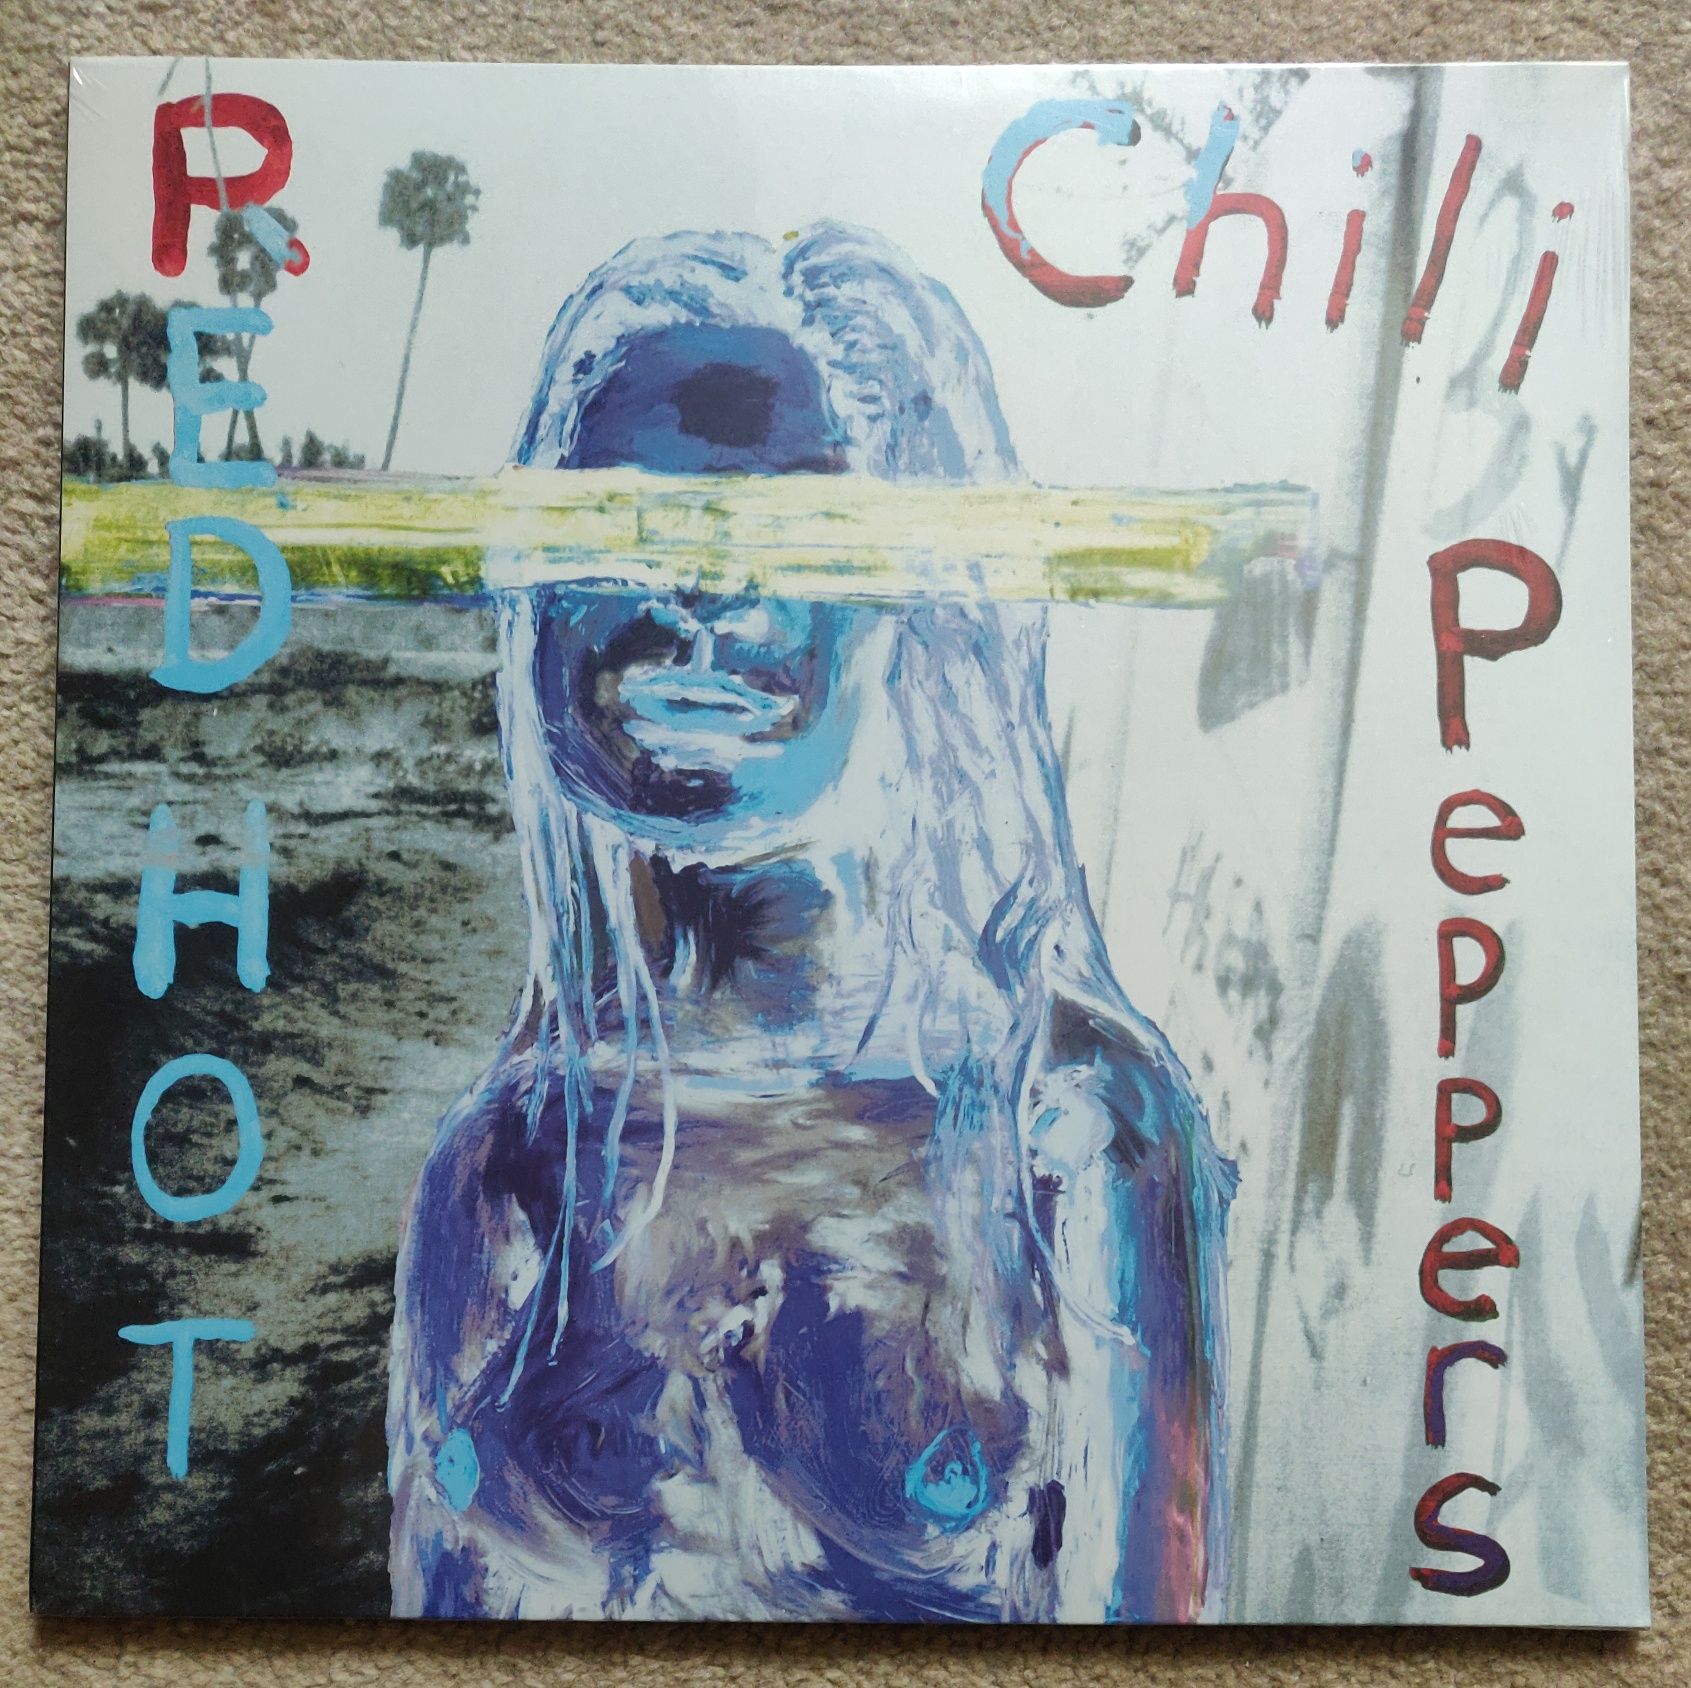 Виниловая пластинка Red hot chili peppers "By the Way" 2LP.Новая.